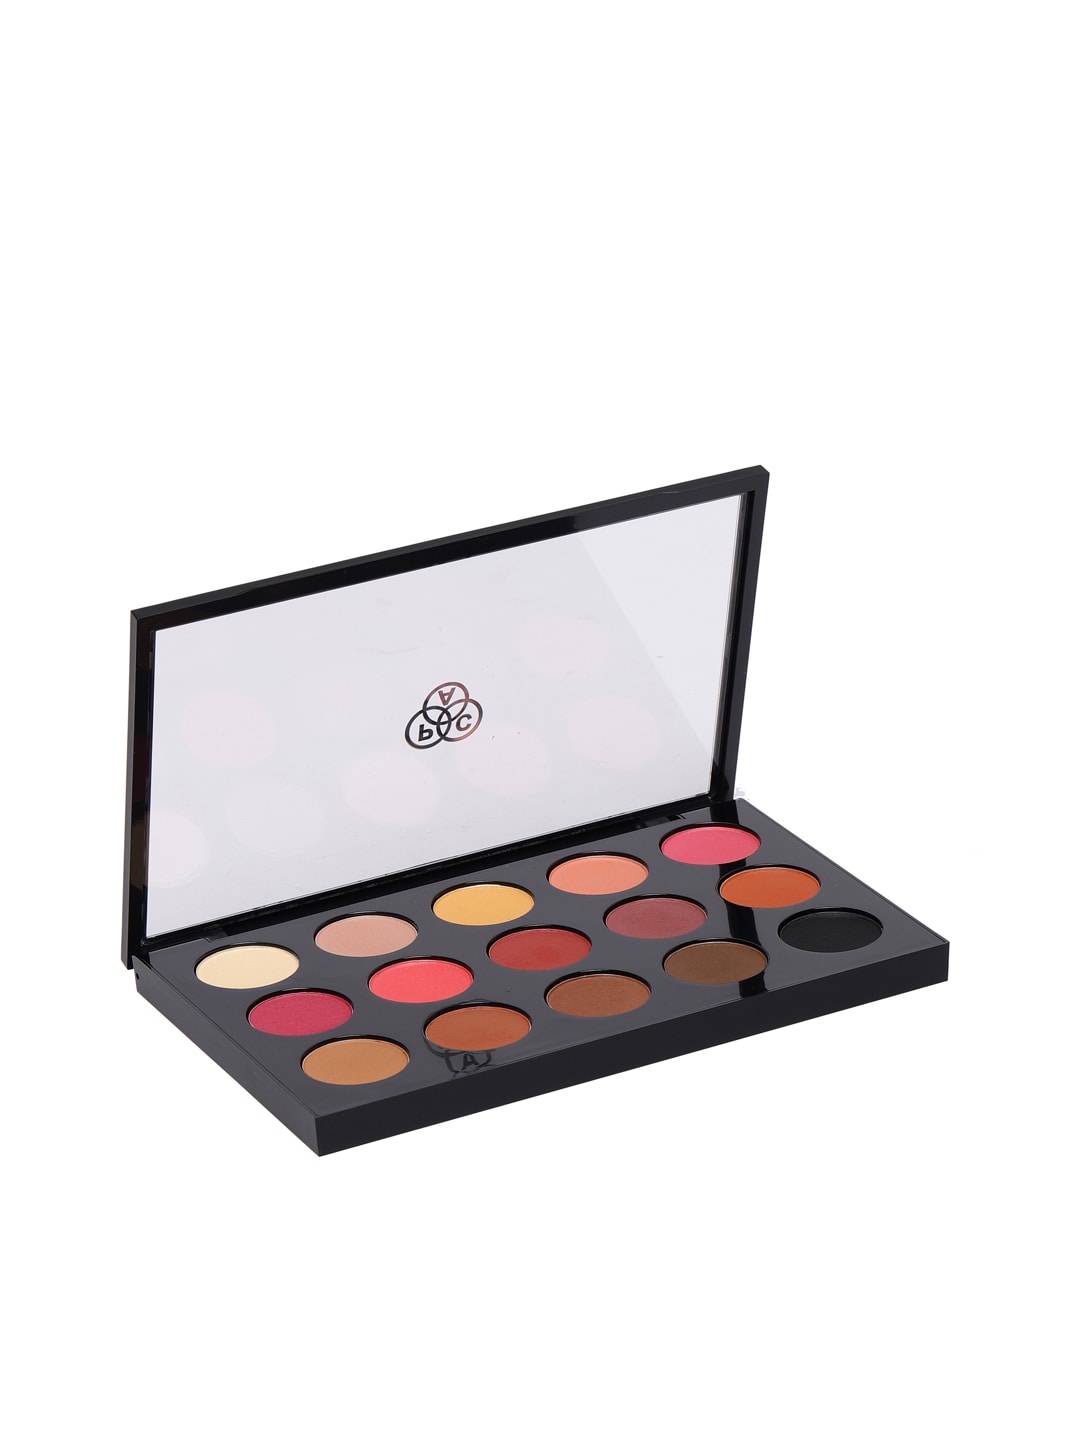 PAC 02 Pure Classic Ultra Eyeshadow Palette 15.2 g Price in India